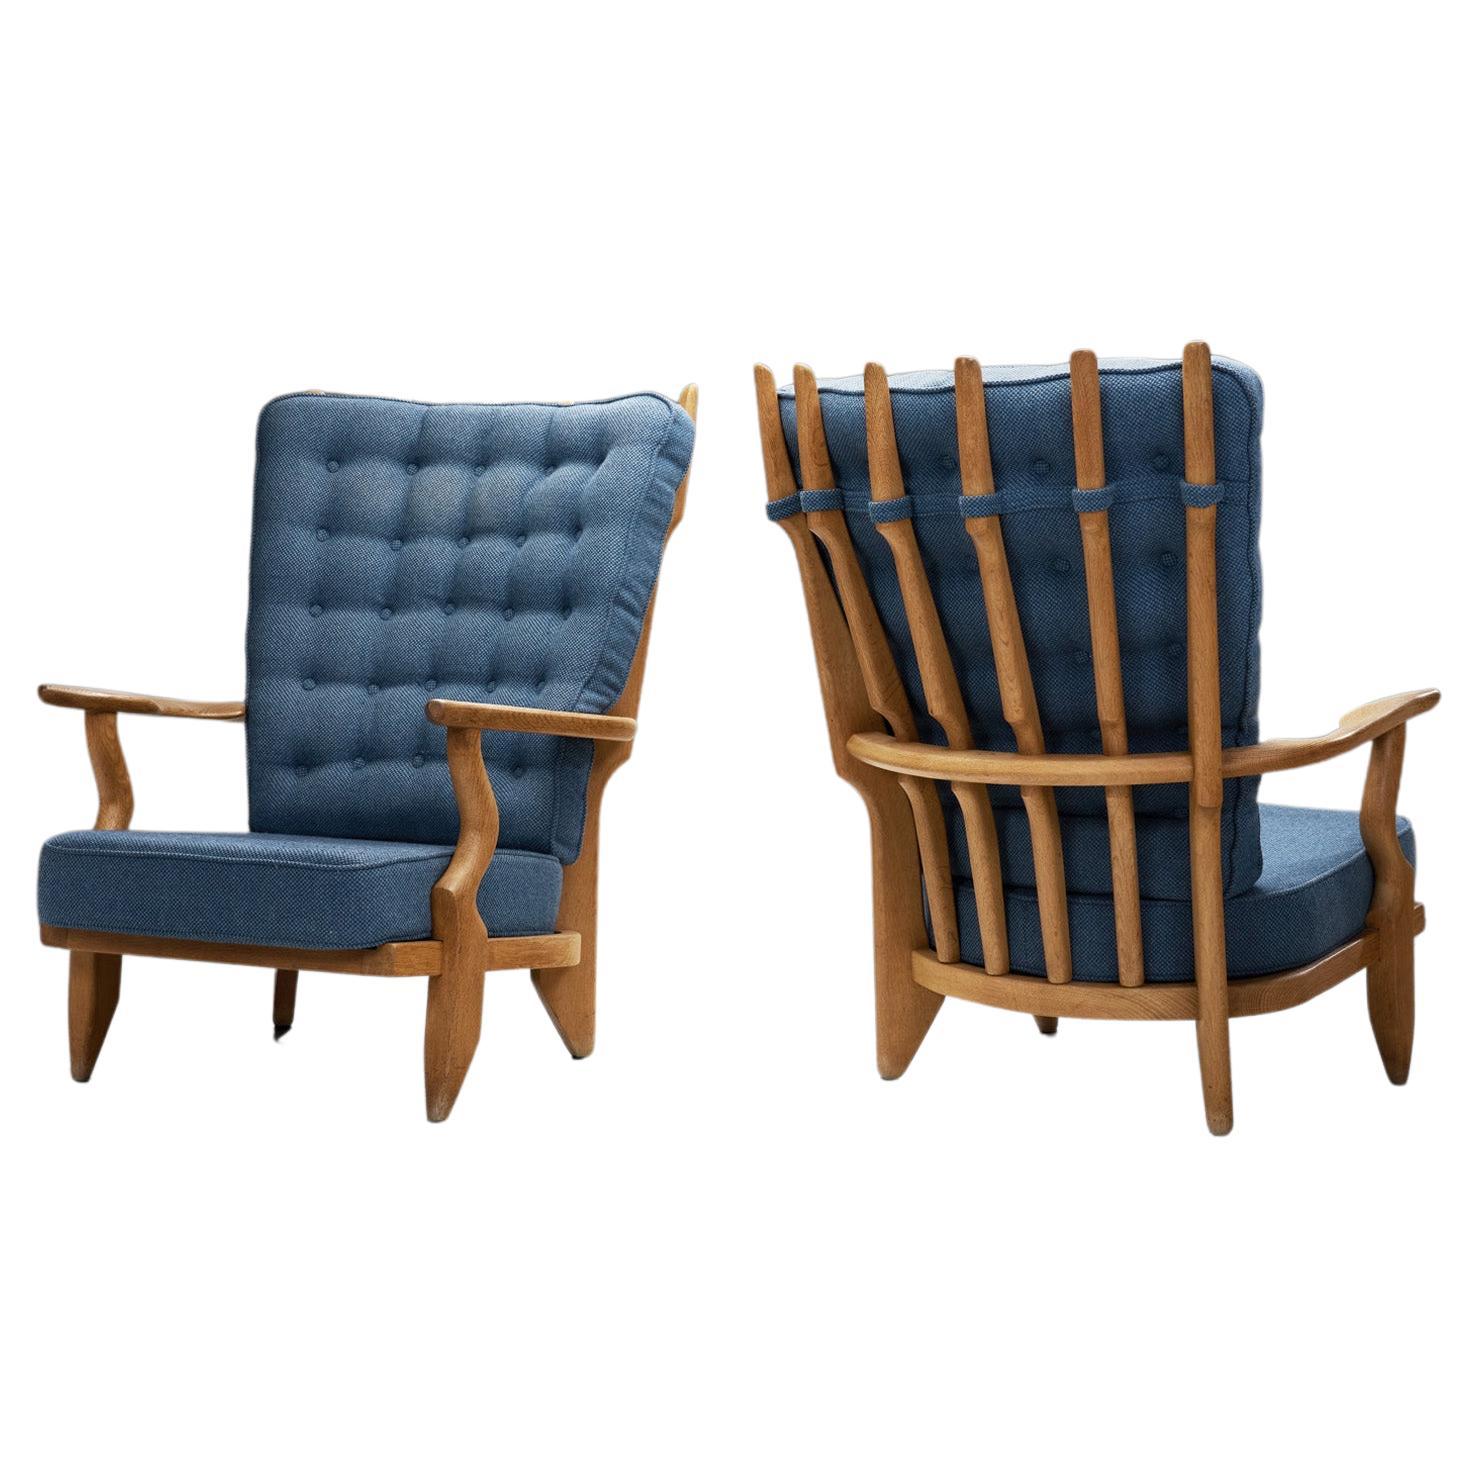 Guillerme et Chambron "Grand Repos" Lounge Chairs, France 1950s For Sale